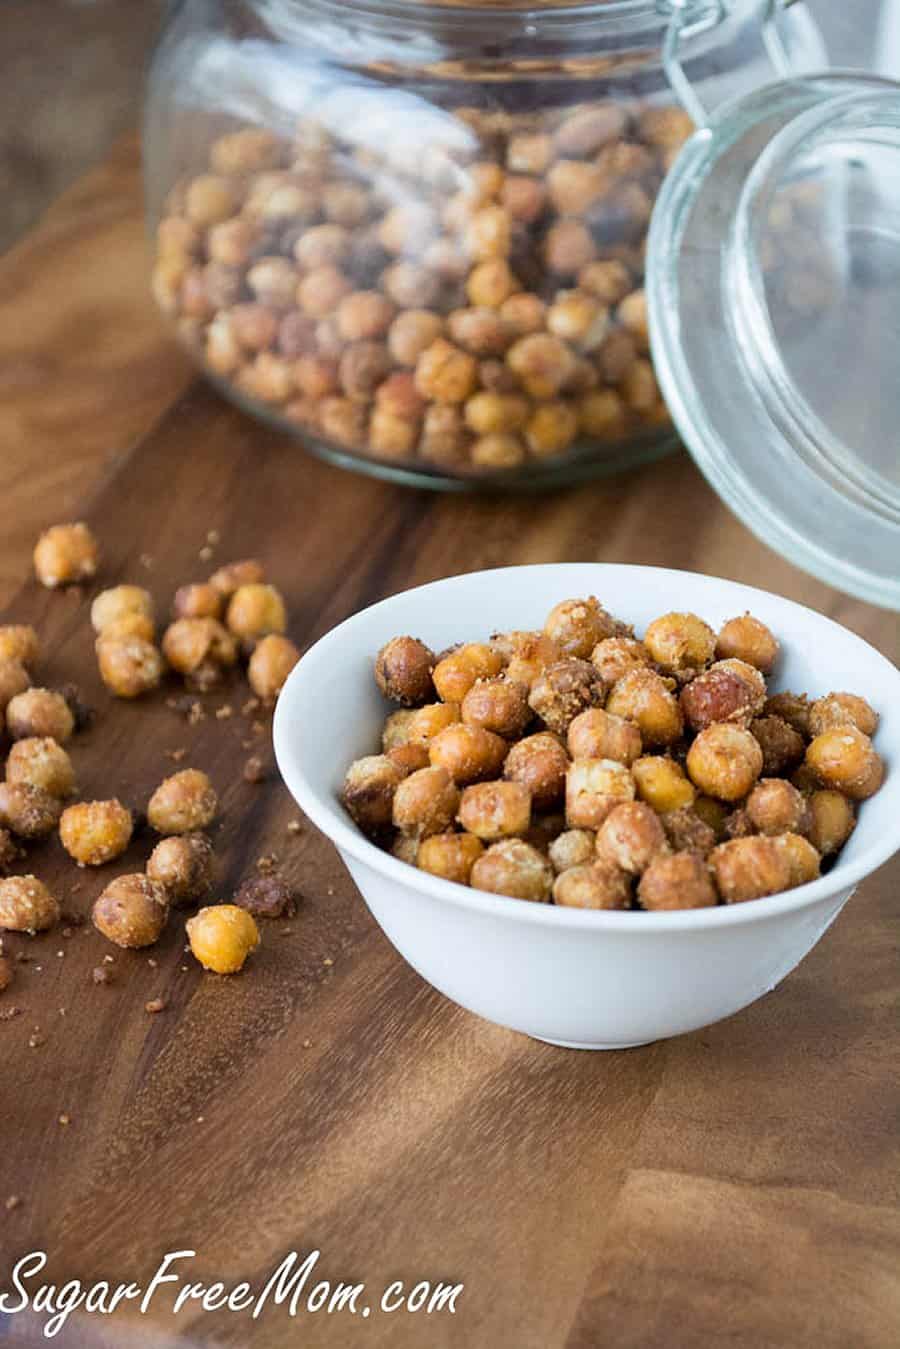 Photo of Garlic Parmesan Roasted Chickpea Snack